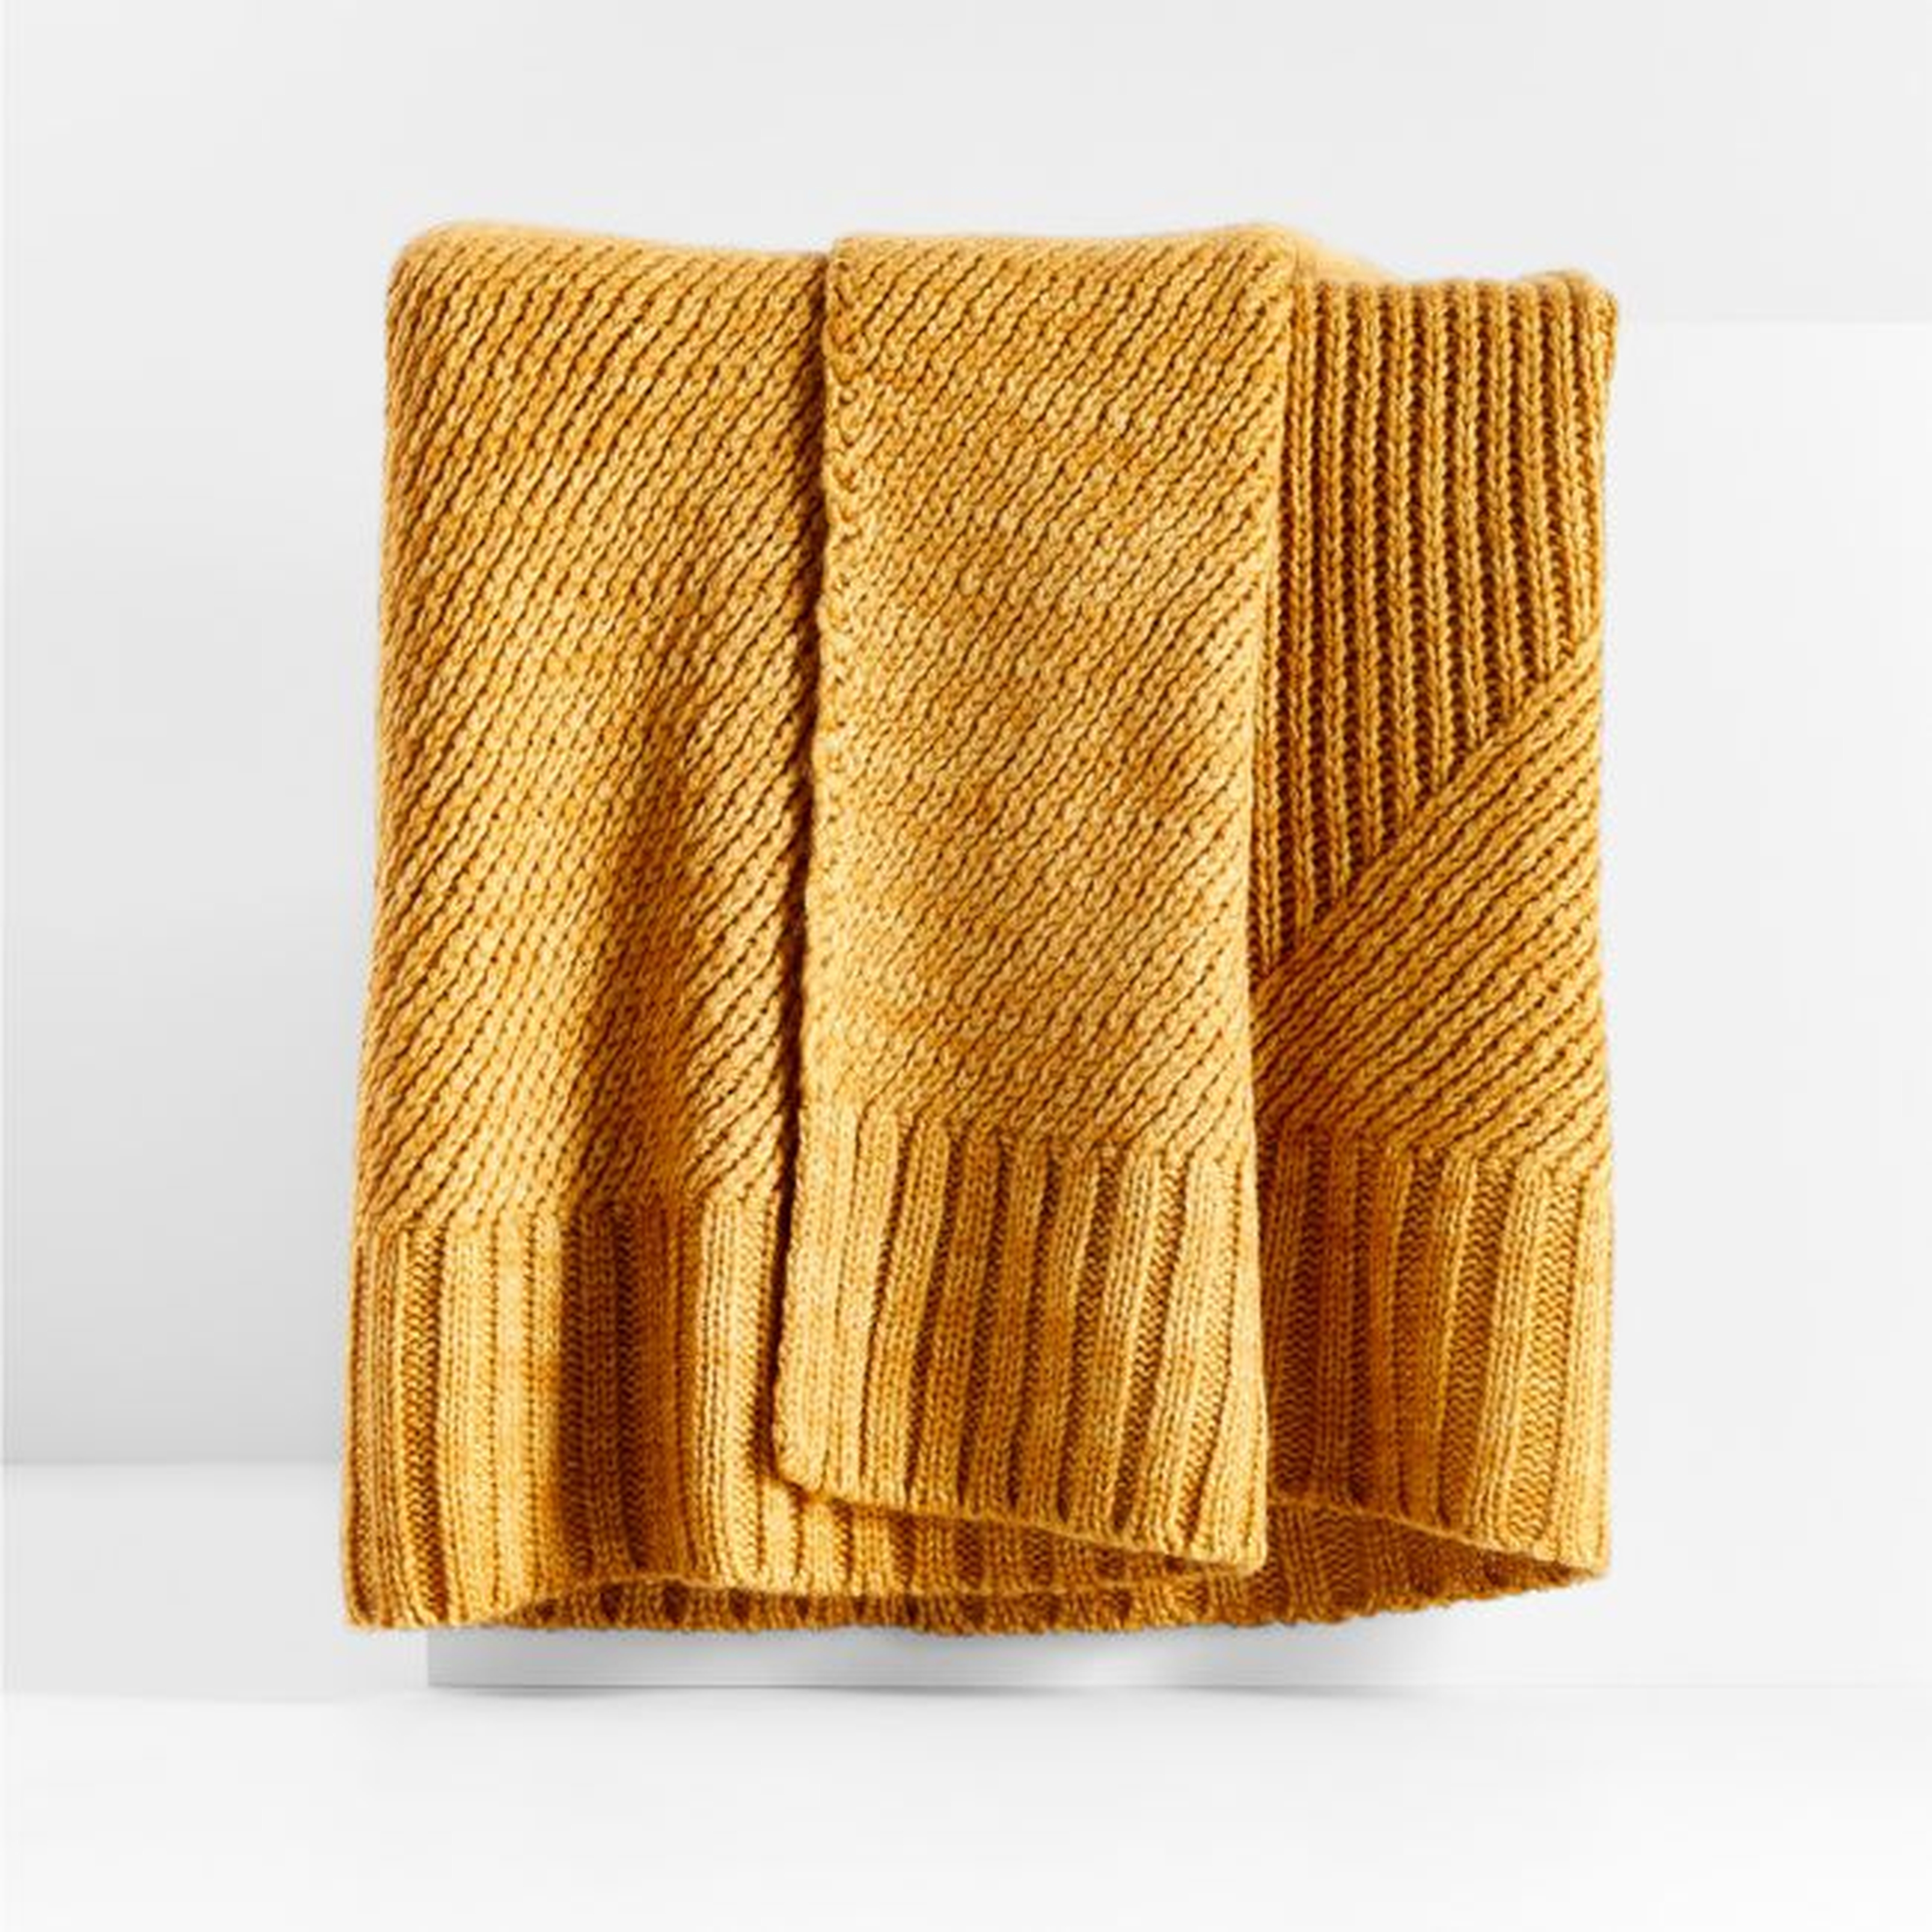 Equinox 70"x55" Tupelo Honey Sweater Knit Throw Blanket - Crate and Barrel